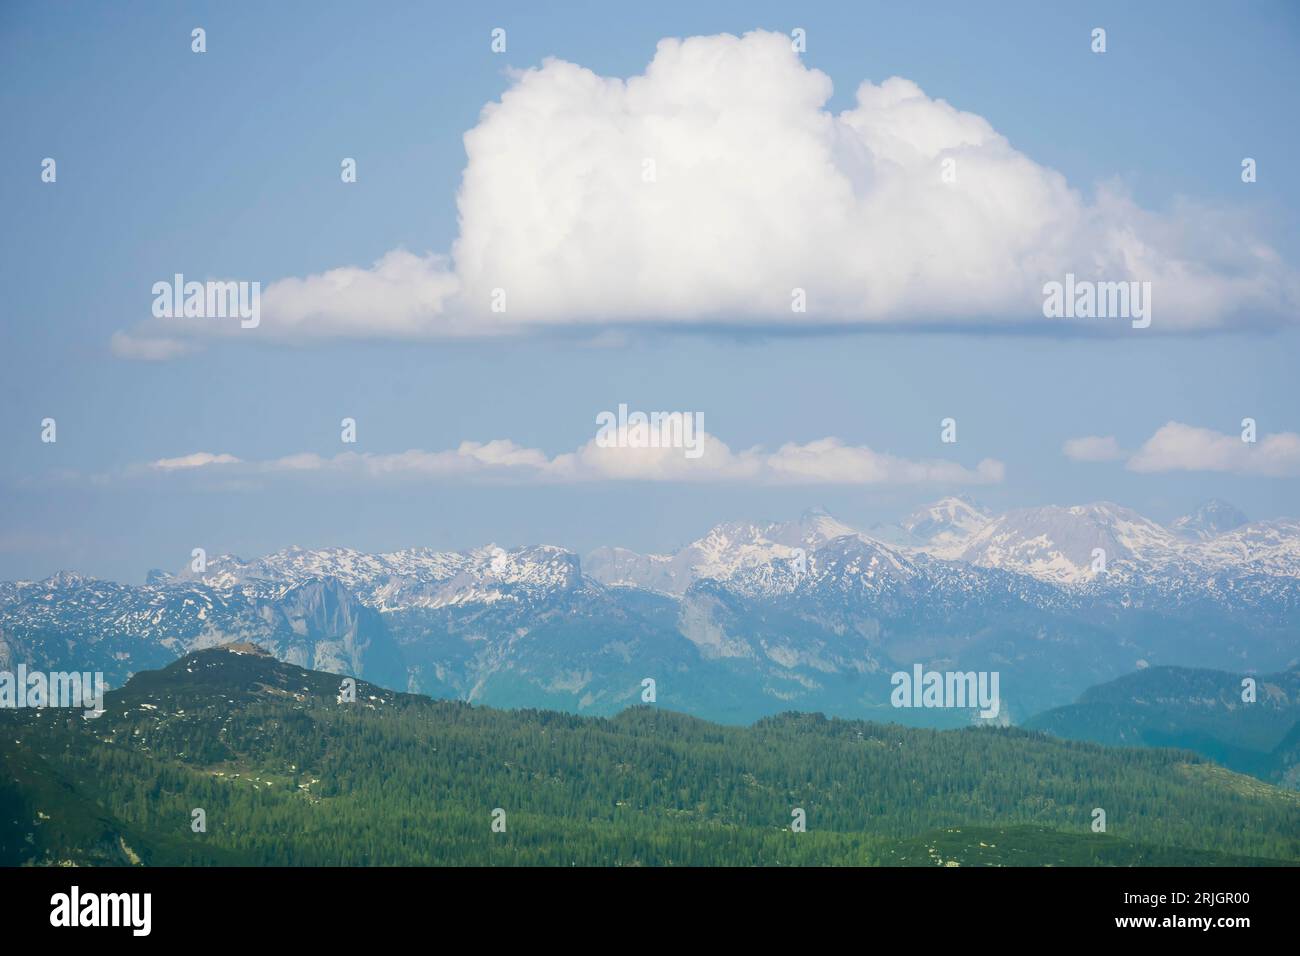 Amazing panorama from '5 Fingers' viewing platform in the shape of a hand with five fingers on Mount Krippenstein in the Dachstein Mountains, Austria Stock Photo